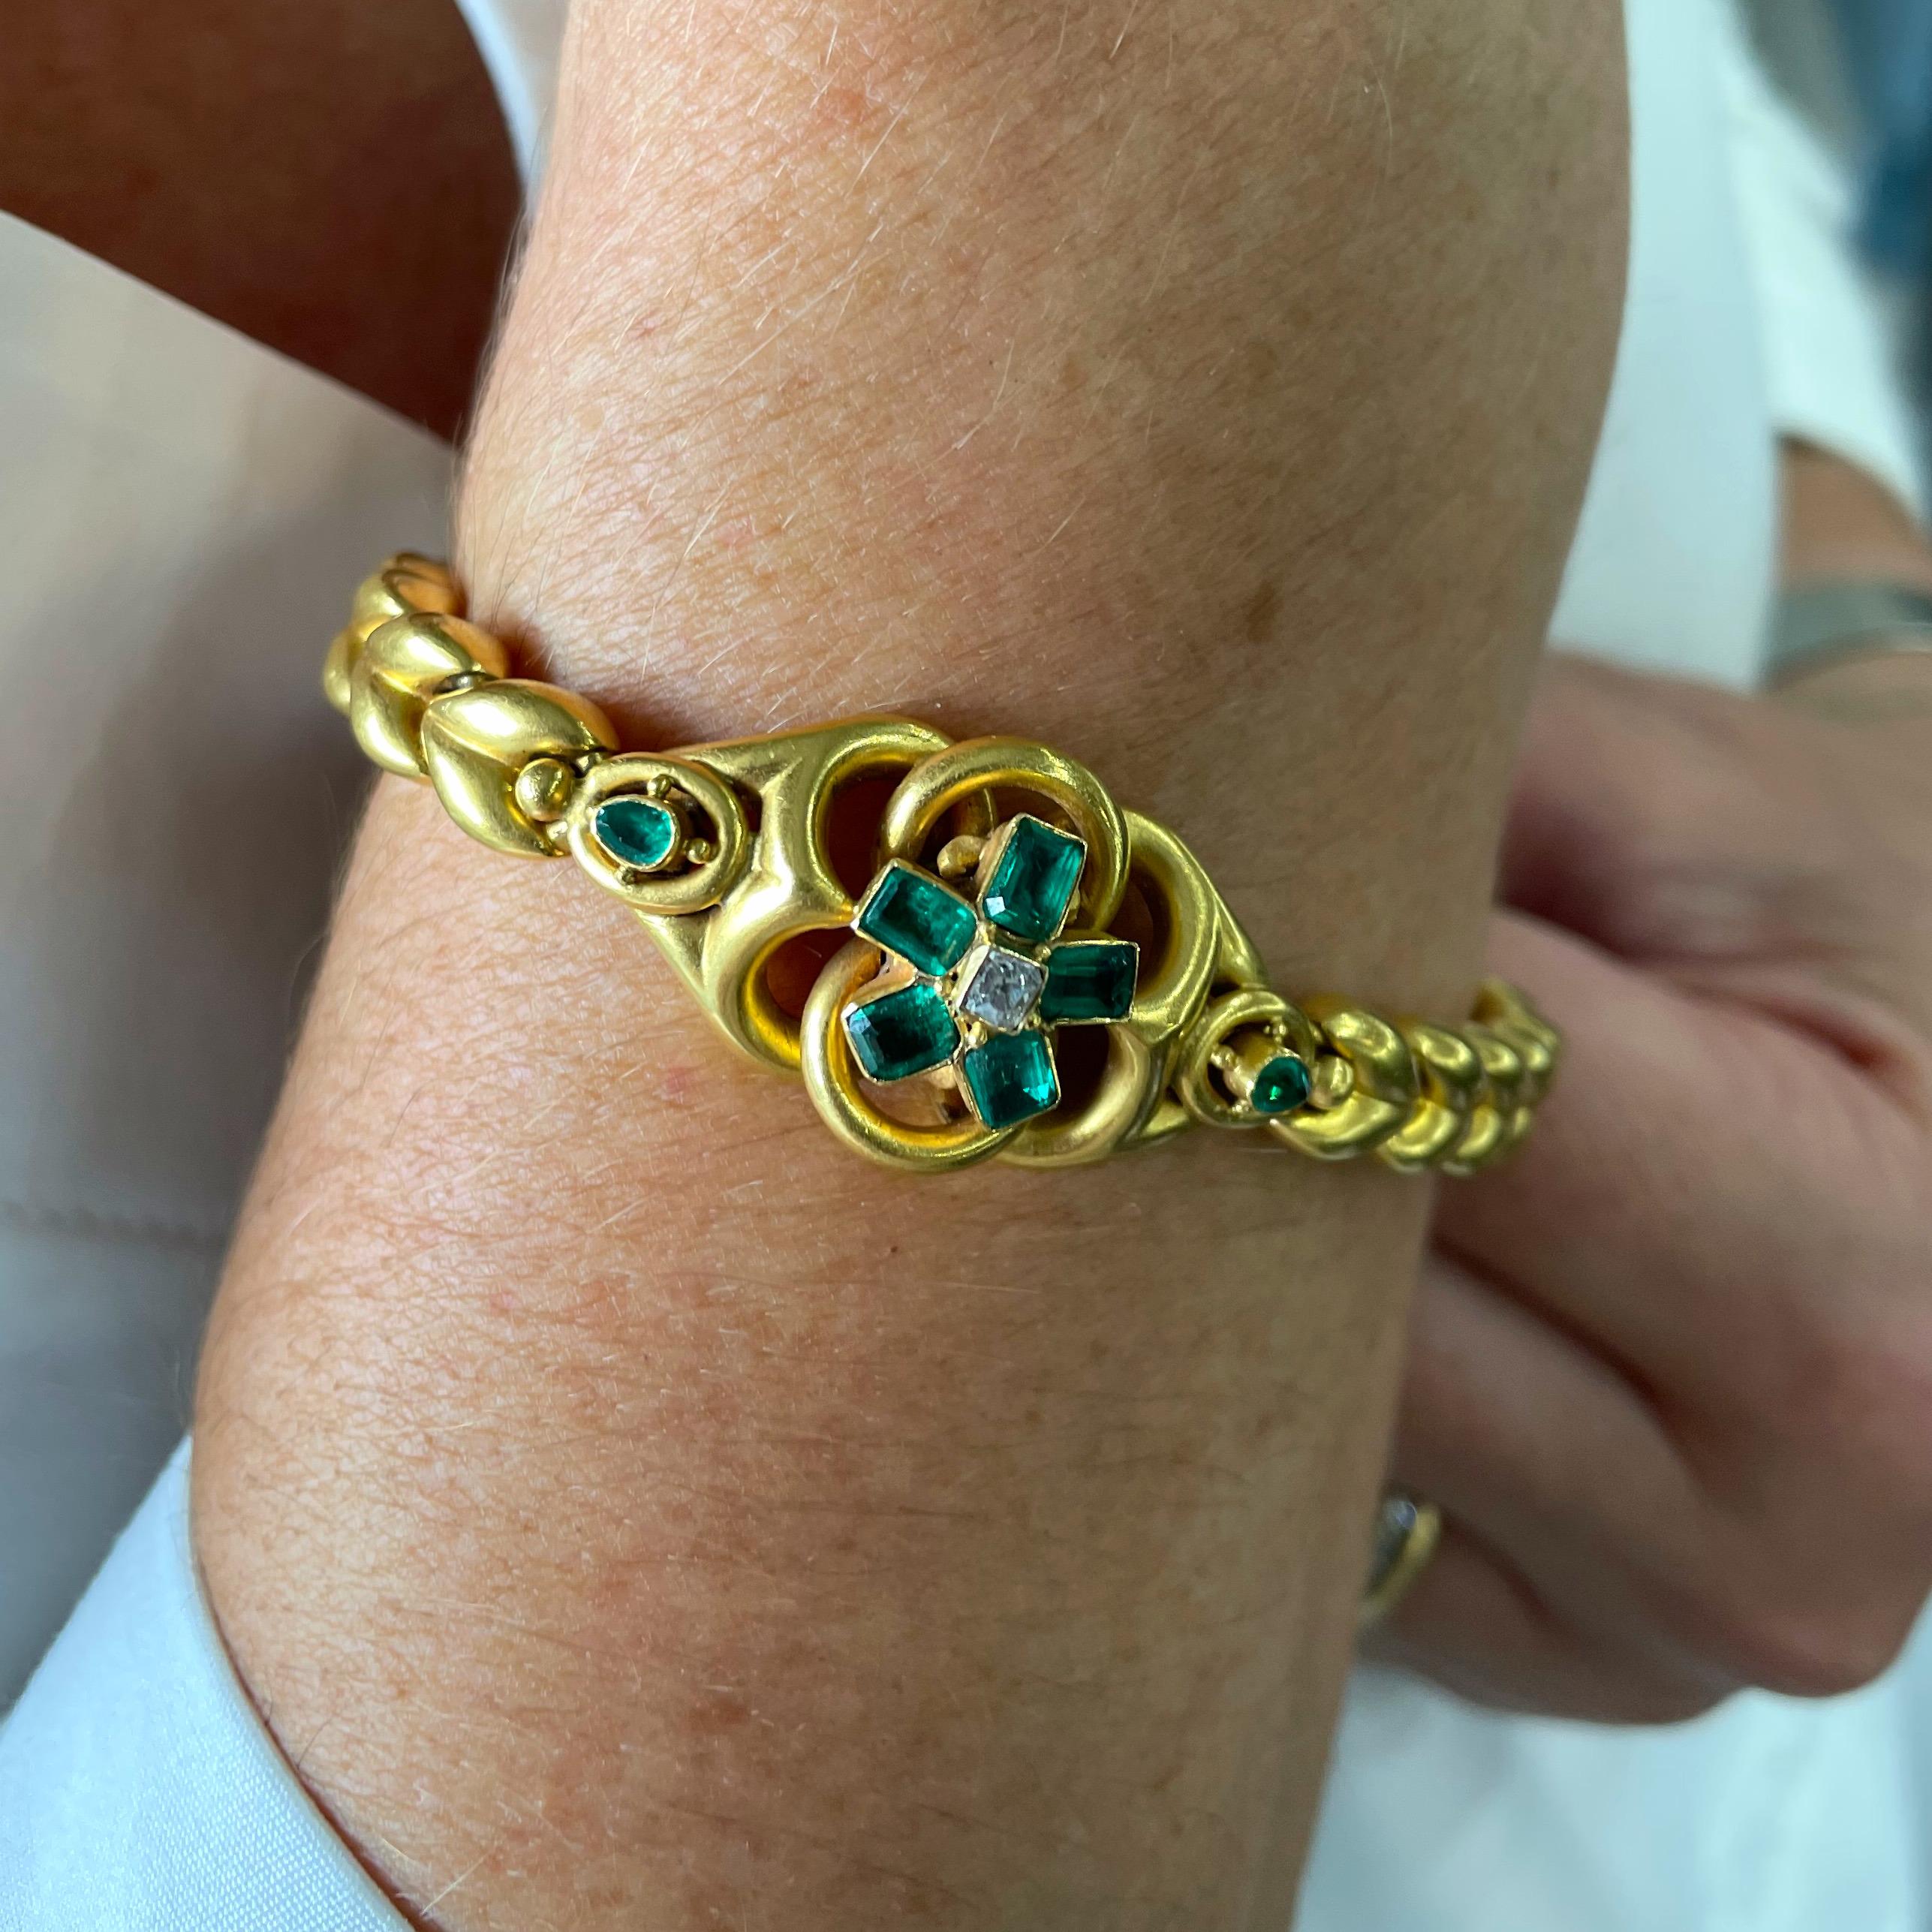 A Victorian gold and emerald bracelet, with an old-cut diamond in the centre surrounded by five step-cut emeralds, in the middle of a gold motif, with a pear shape emerald on each shoulder. With a hair locket mounted in the back. Circa 1880.
The